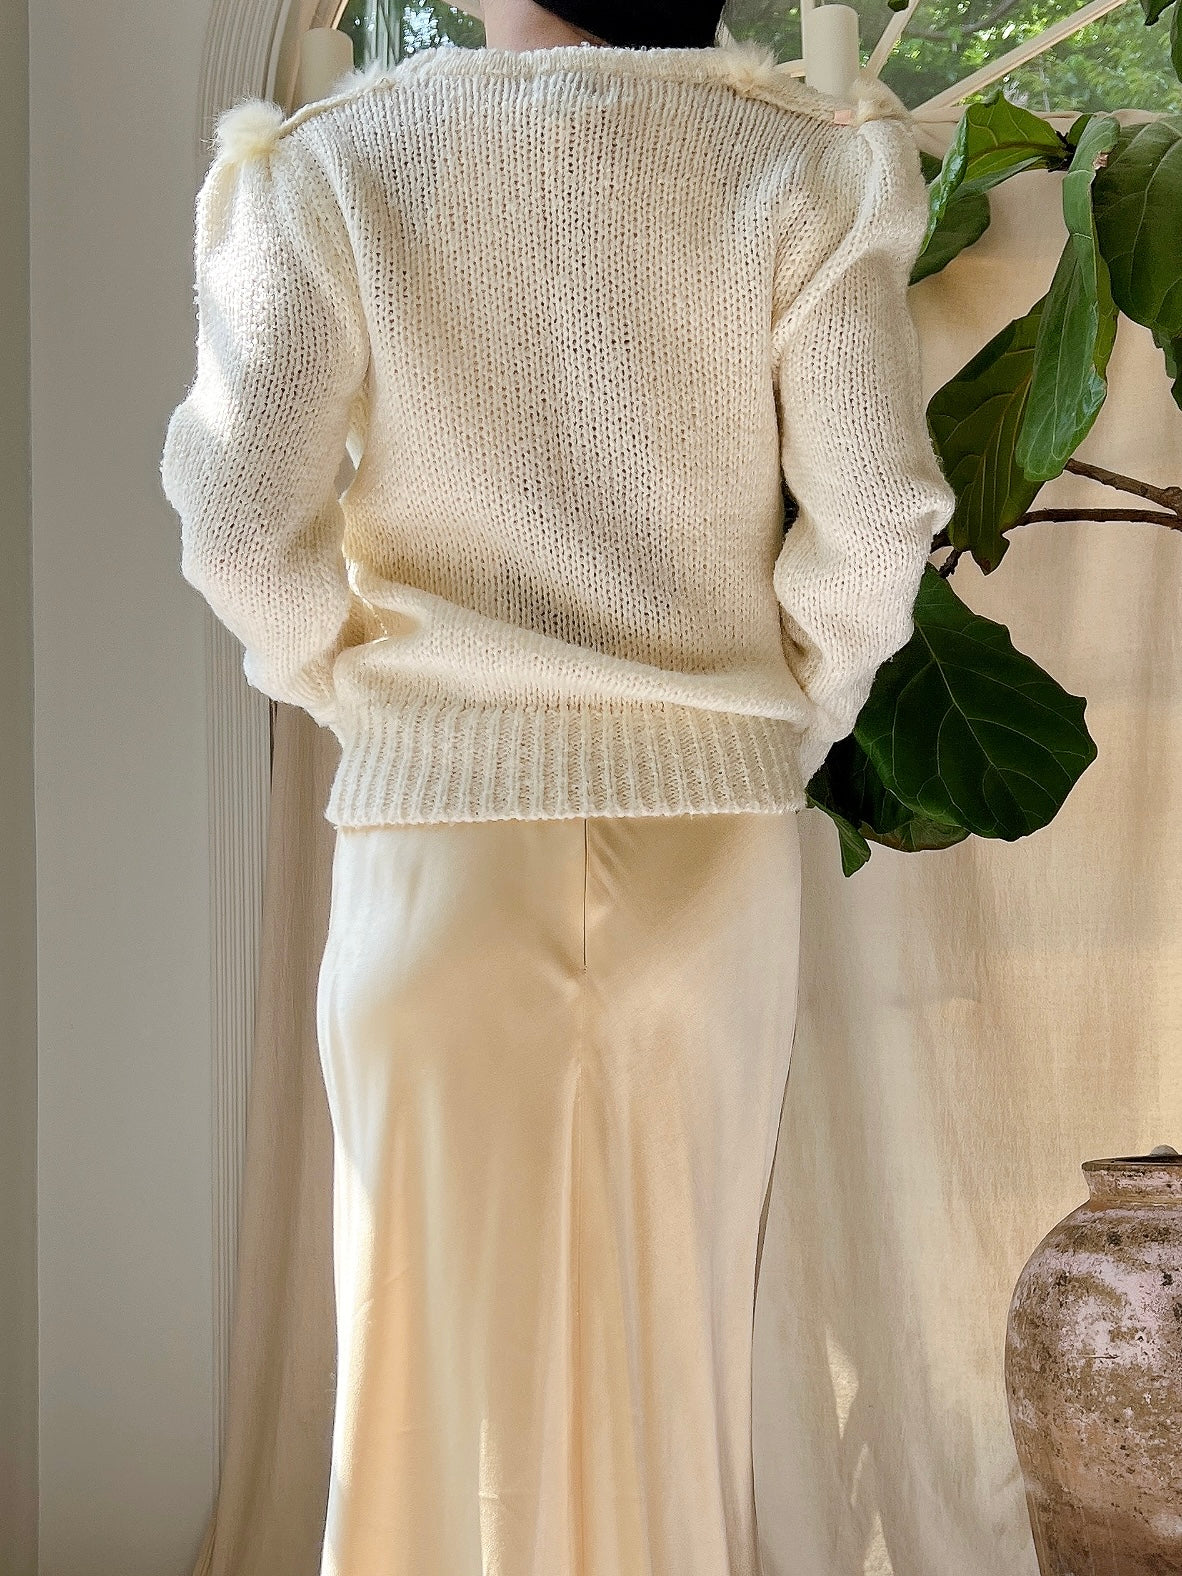 Vintage Knit Textured Pullover - S